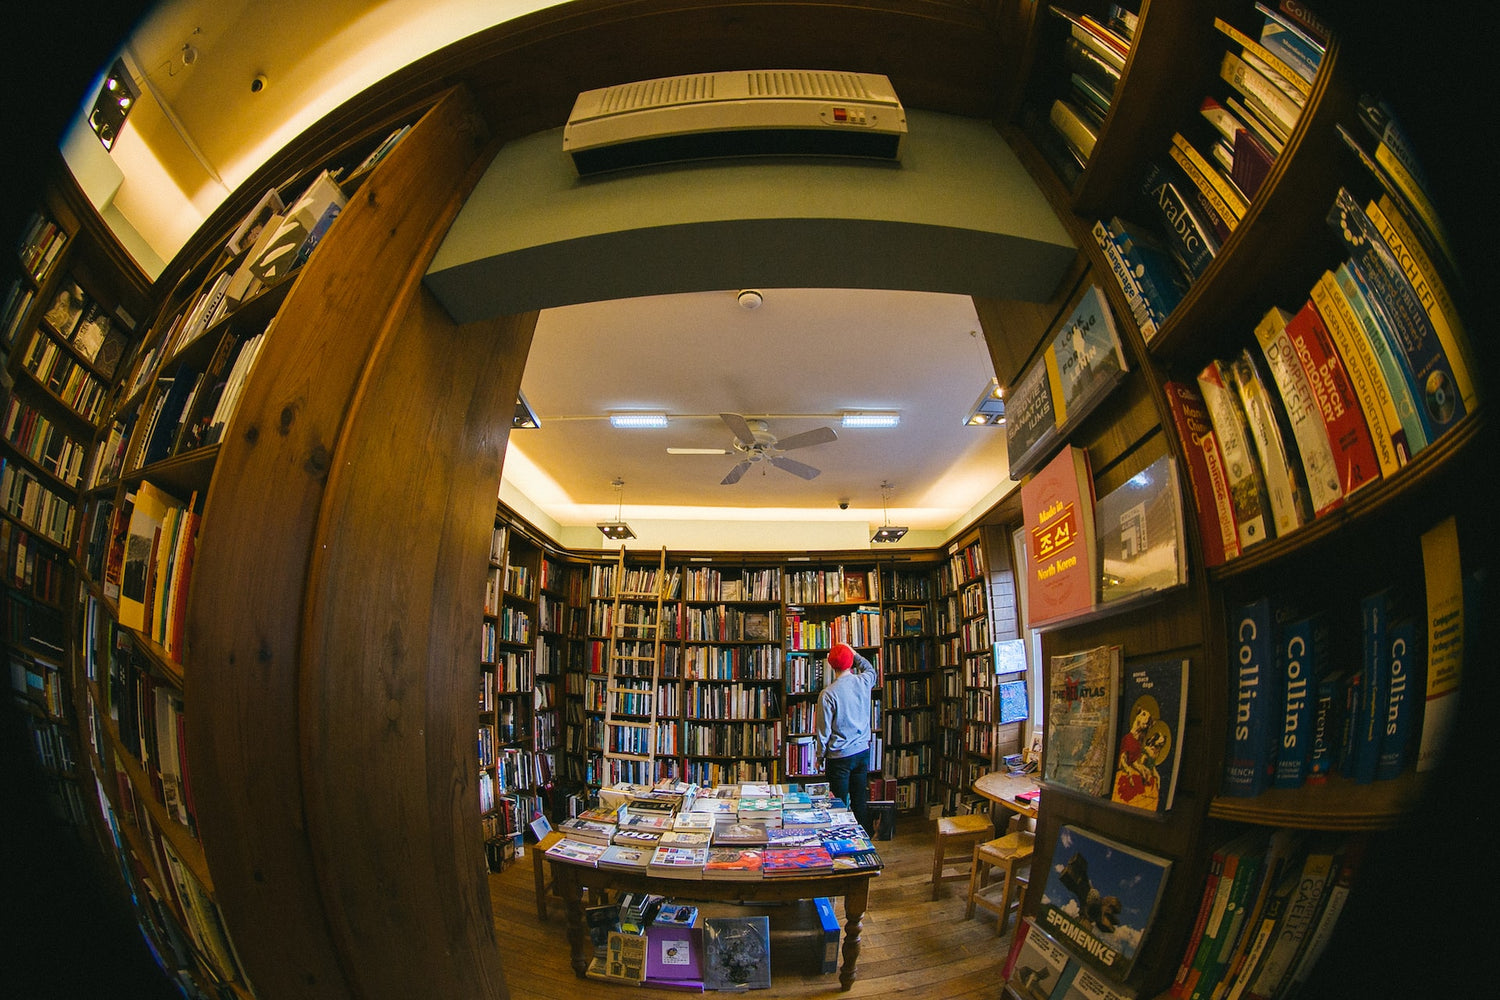 a fisheye view photo of the library by Phil Hearing on Unsplash